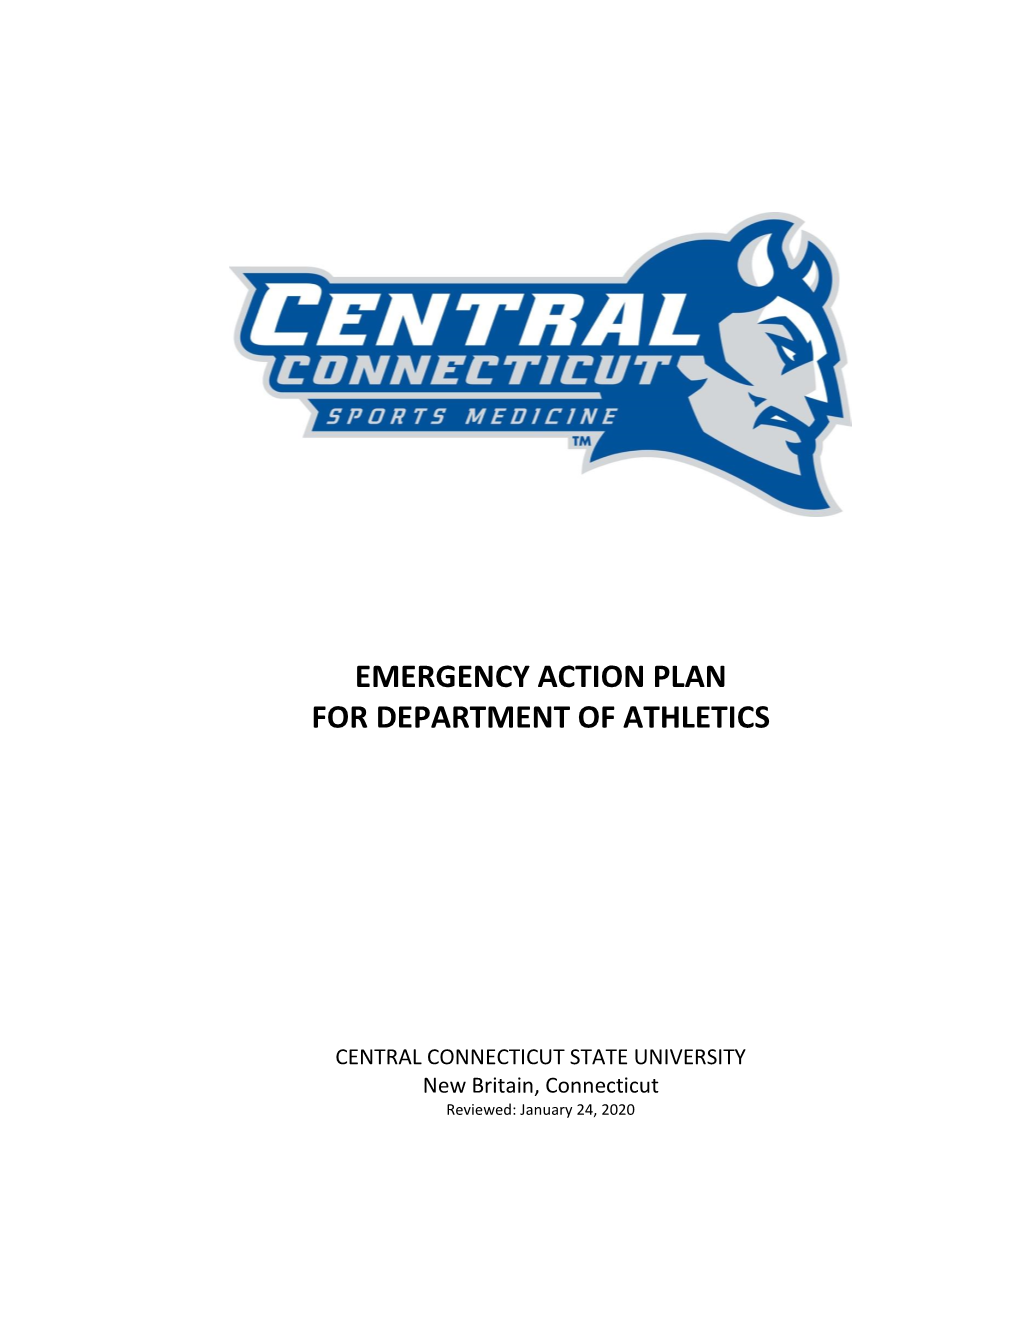 Emergency Action Plan for Department of Athletics